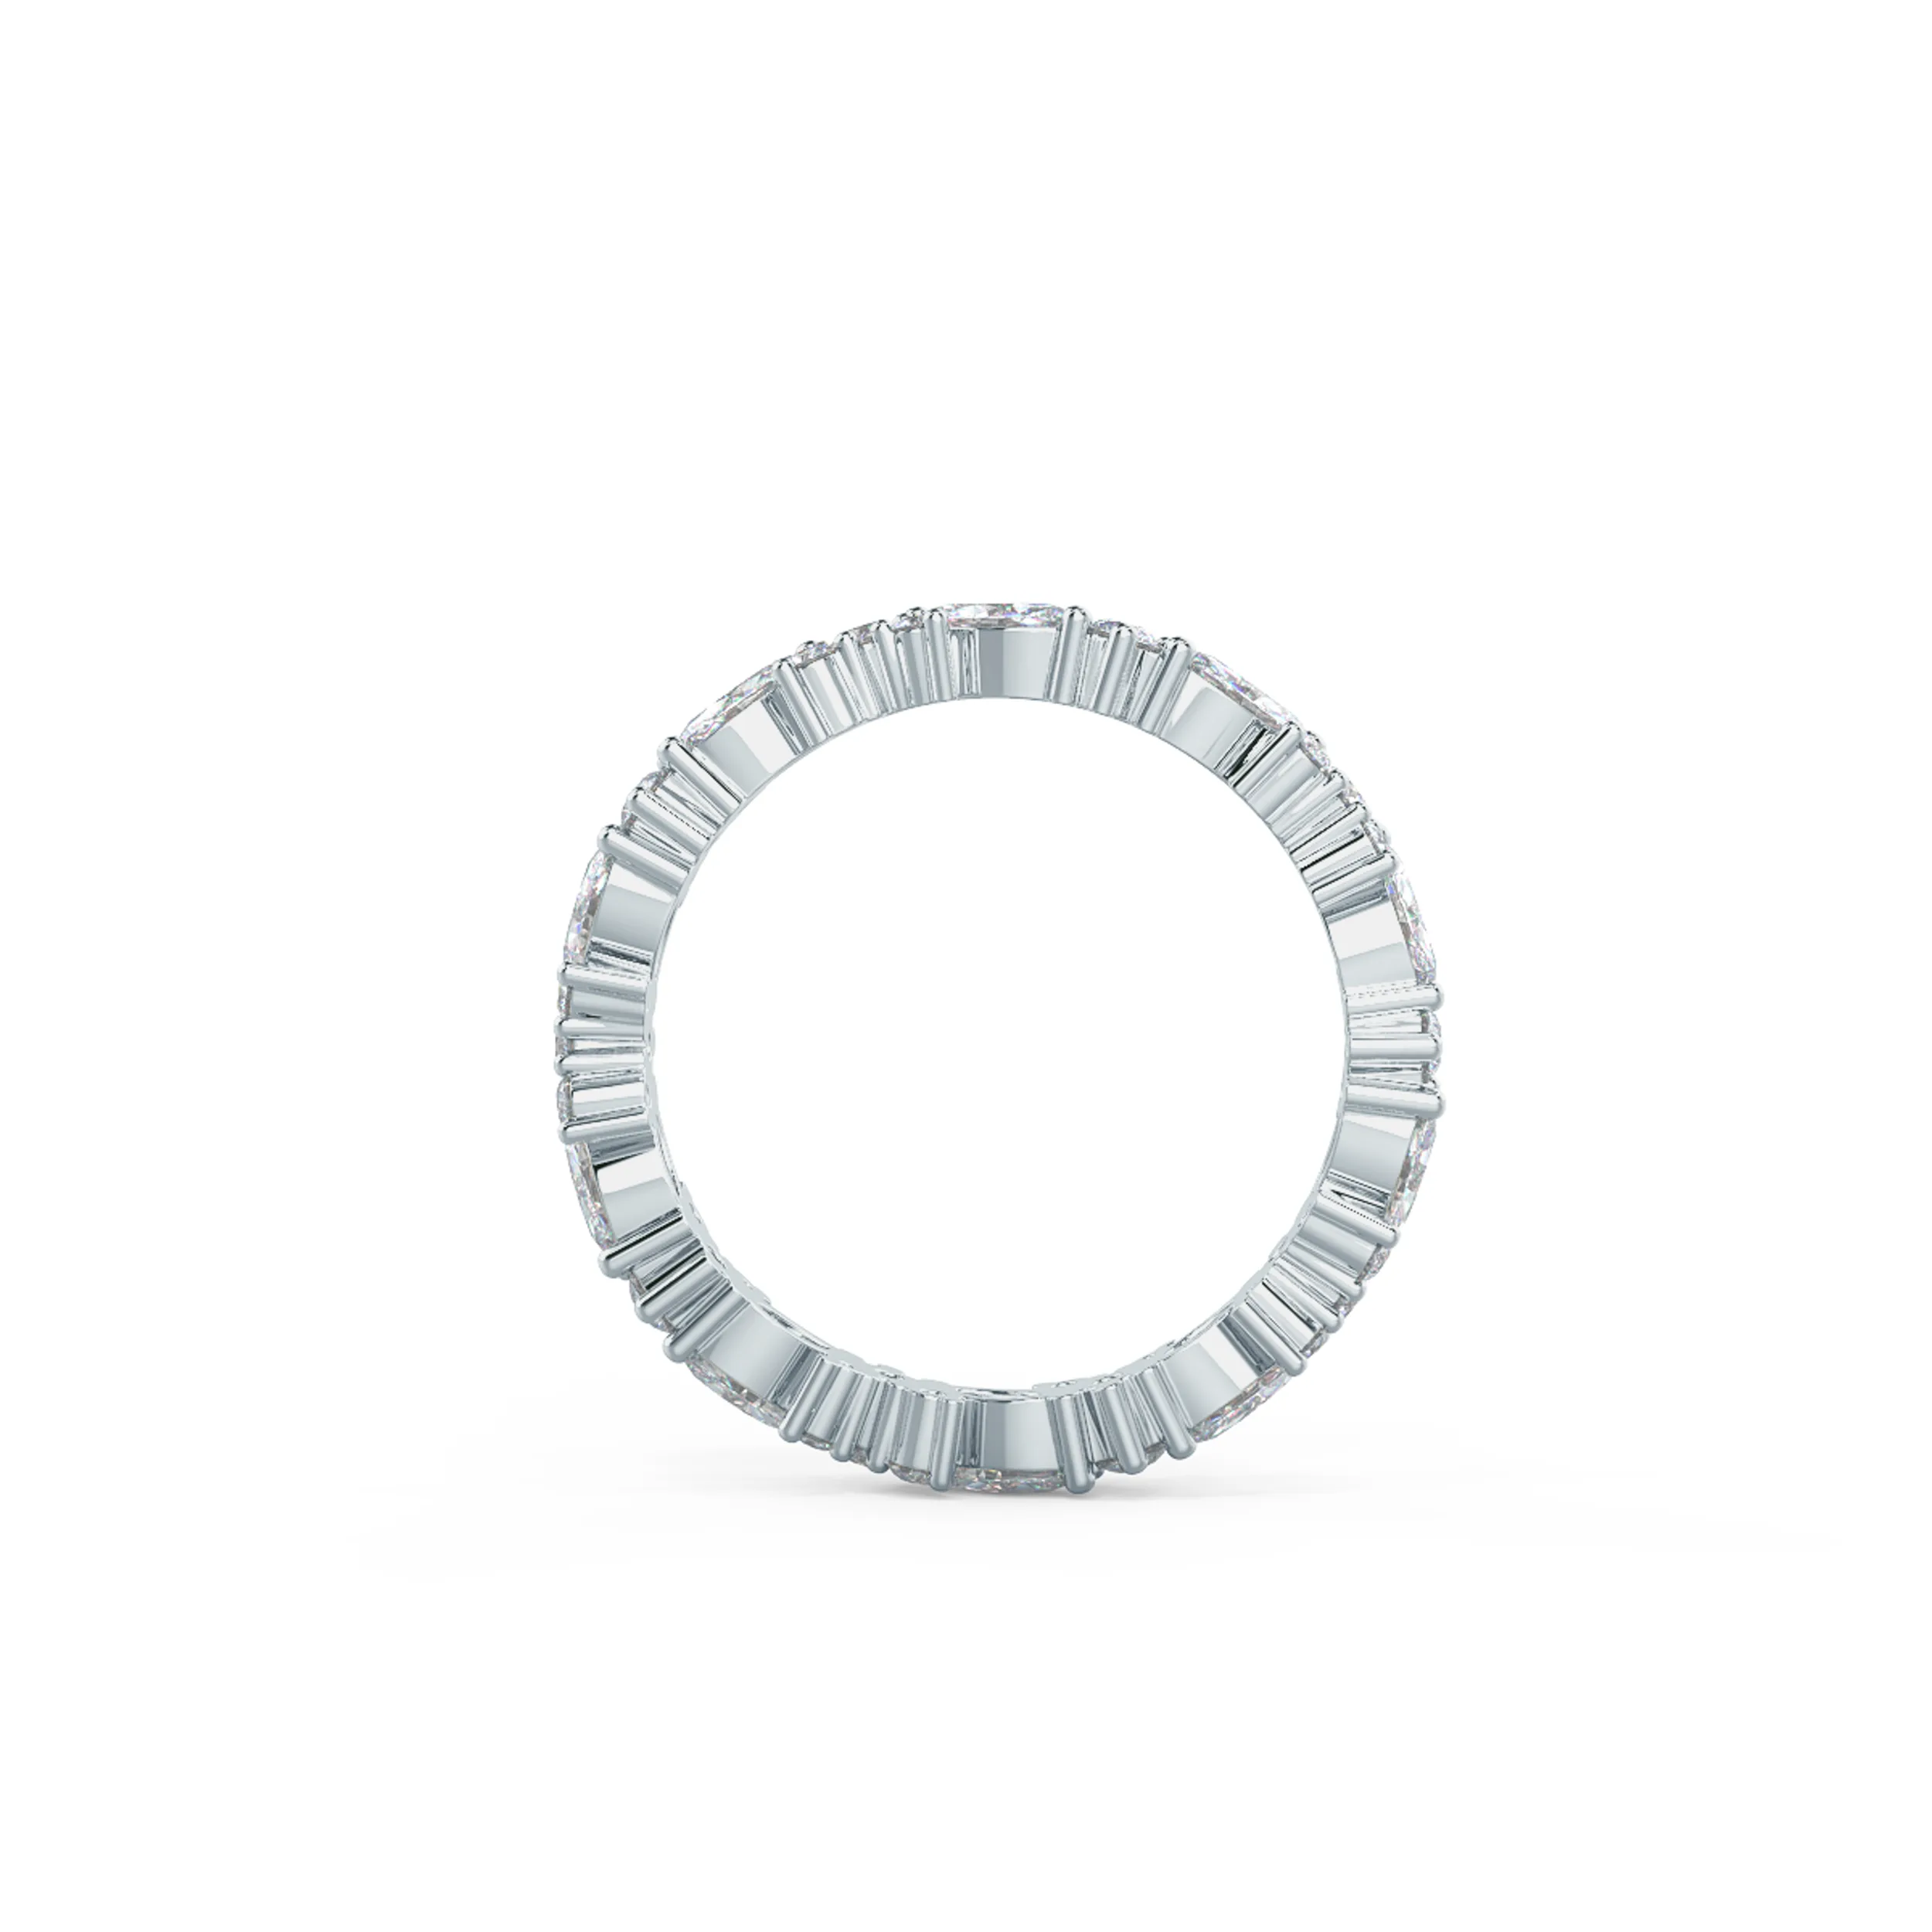 Exceptional Quality 1.35 Carat Lab Diamonds set in 18k White Gold Jessica Eternity Band (Profile View)